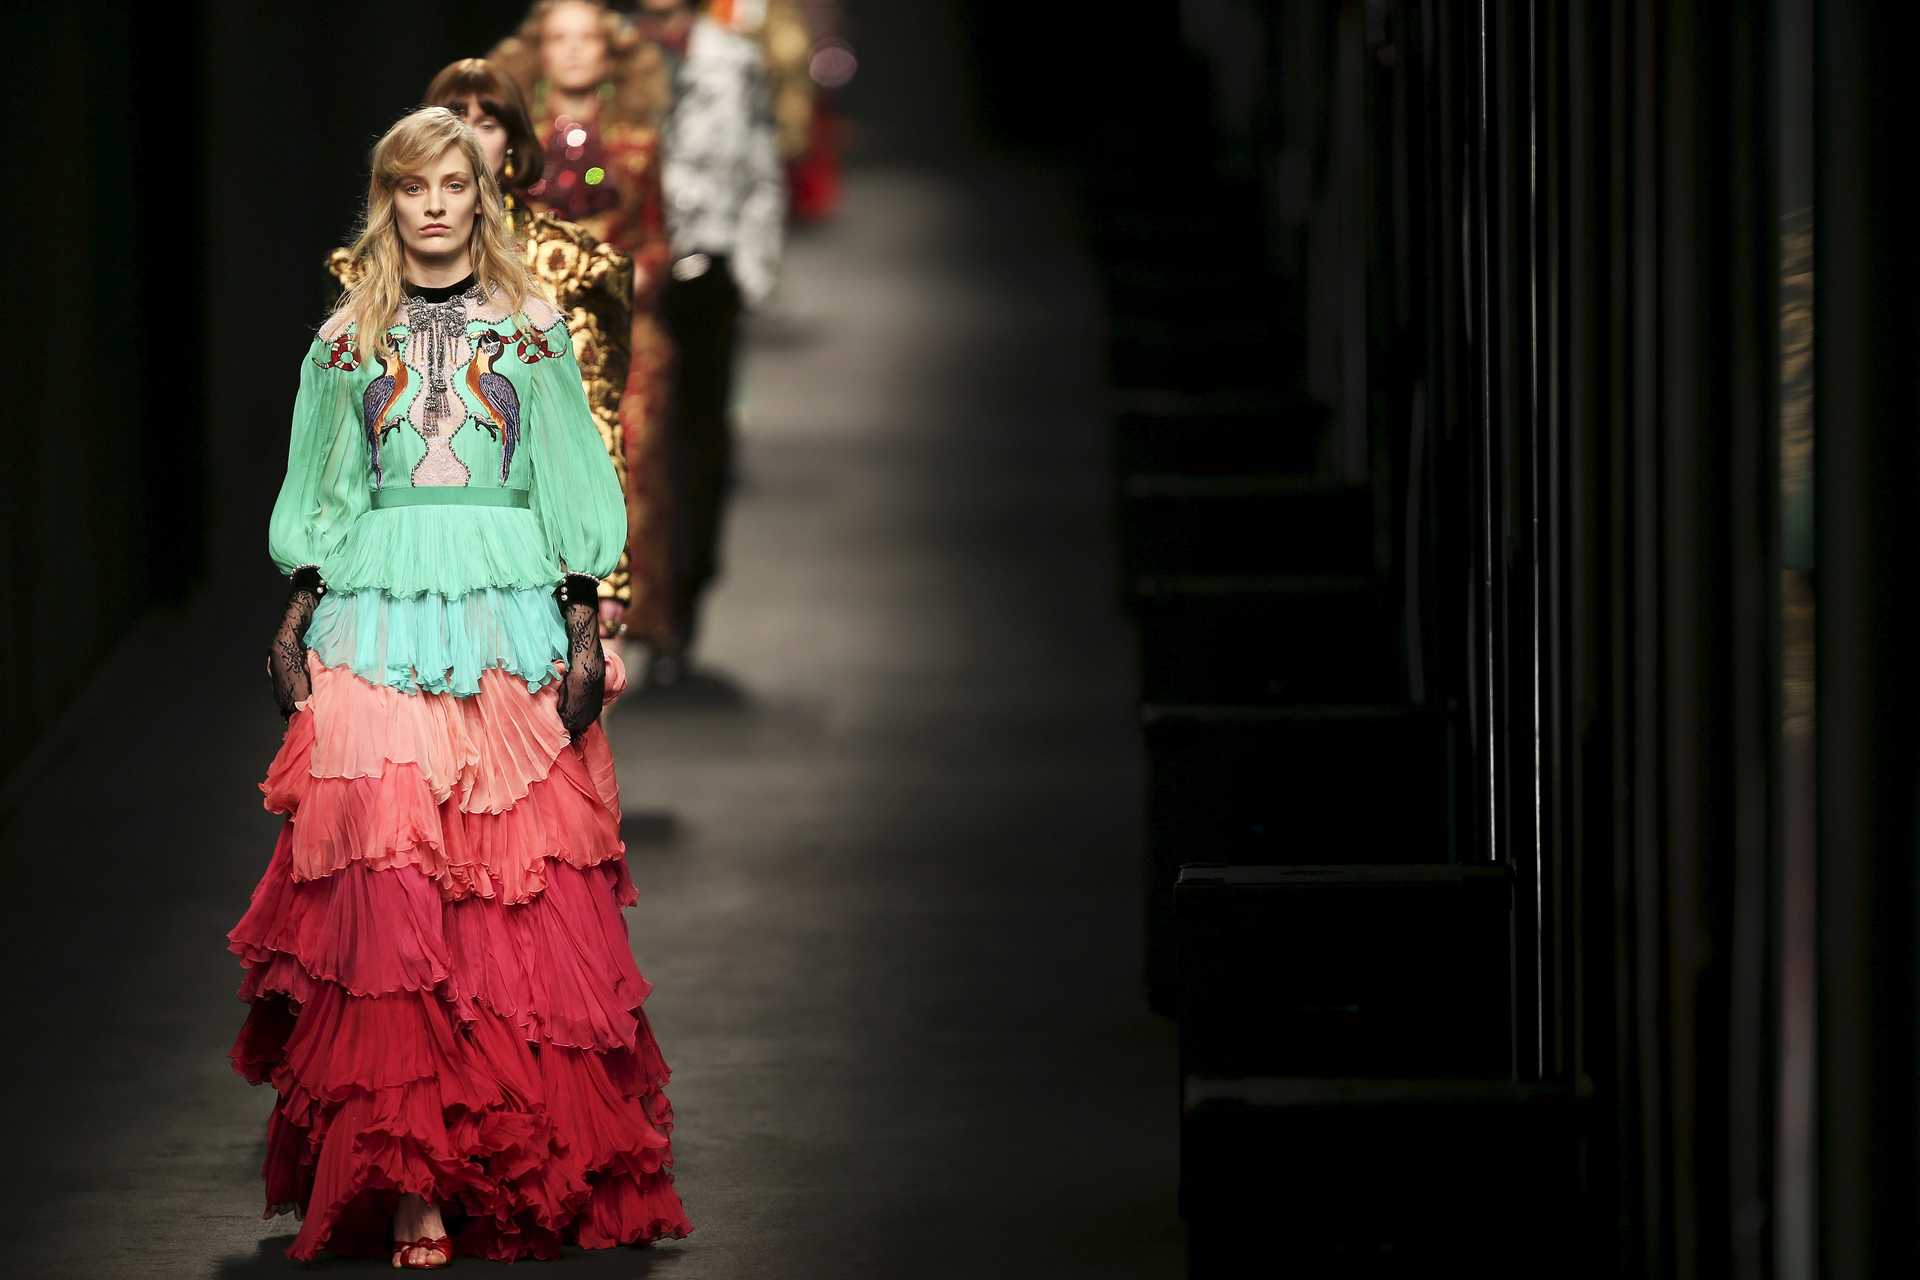 Models present creations from the Gucci Autumn/Winter 2016 woman collection during Milan Fashion Week